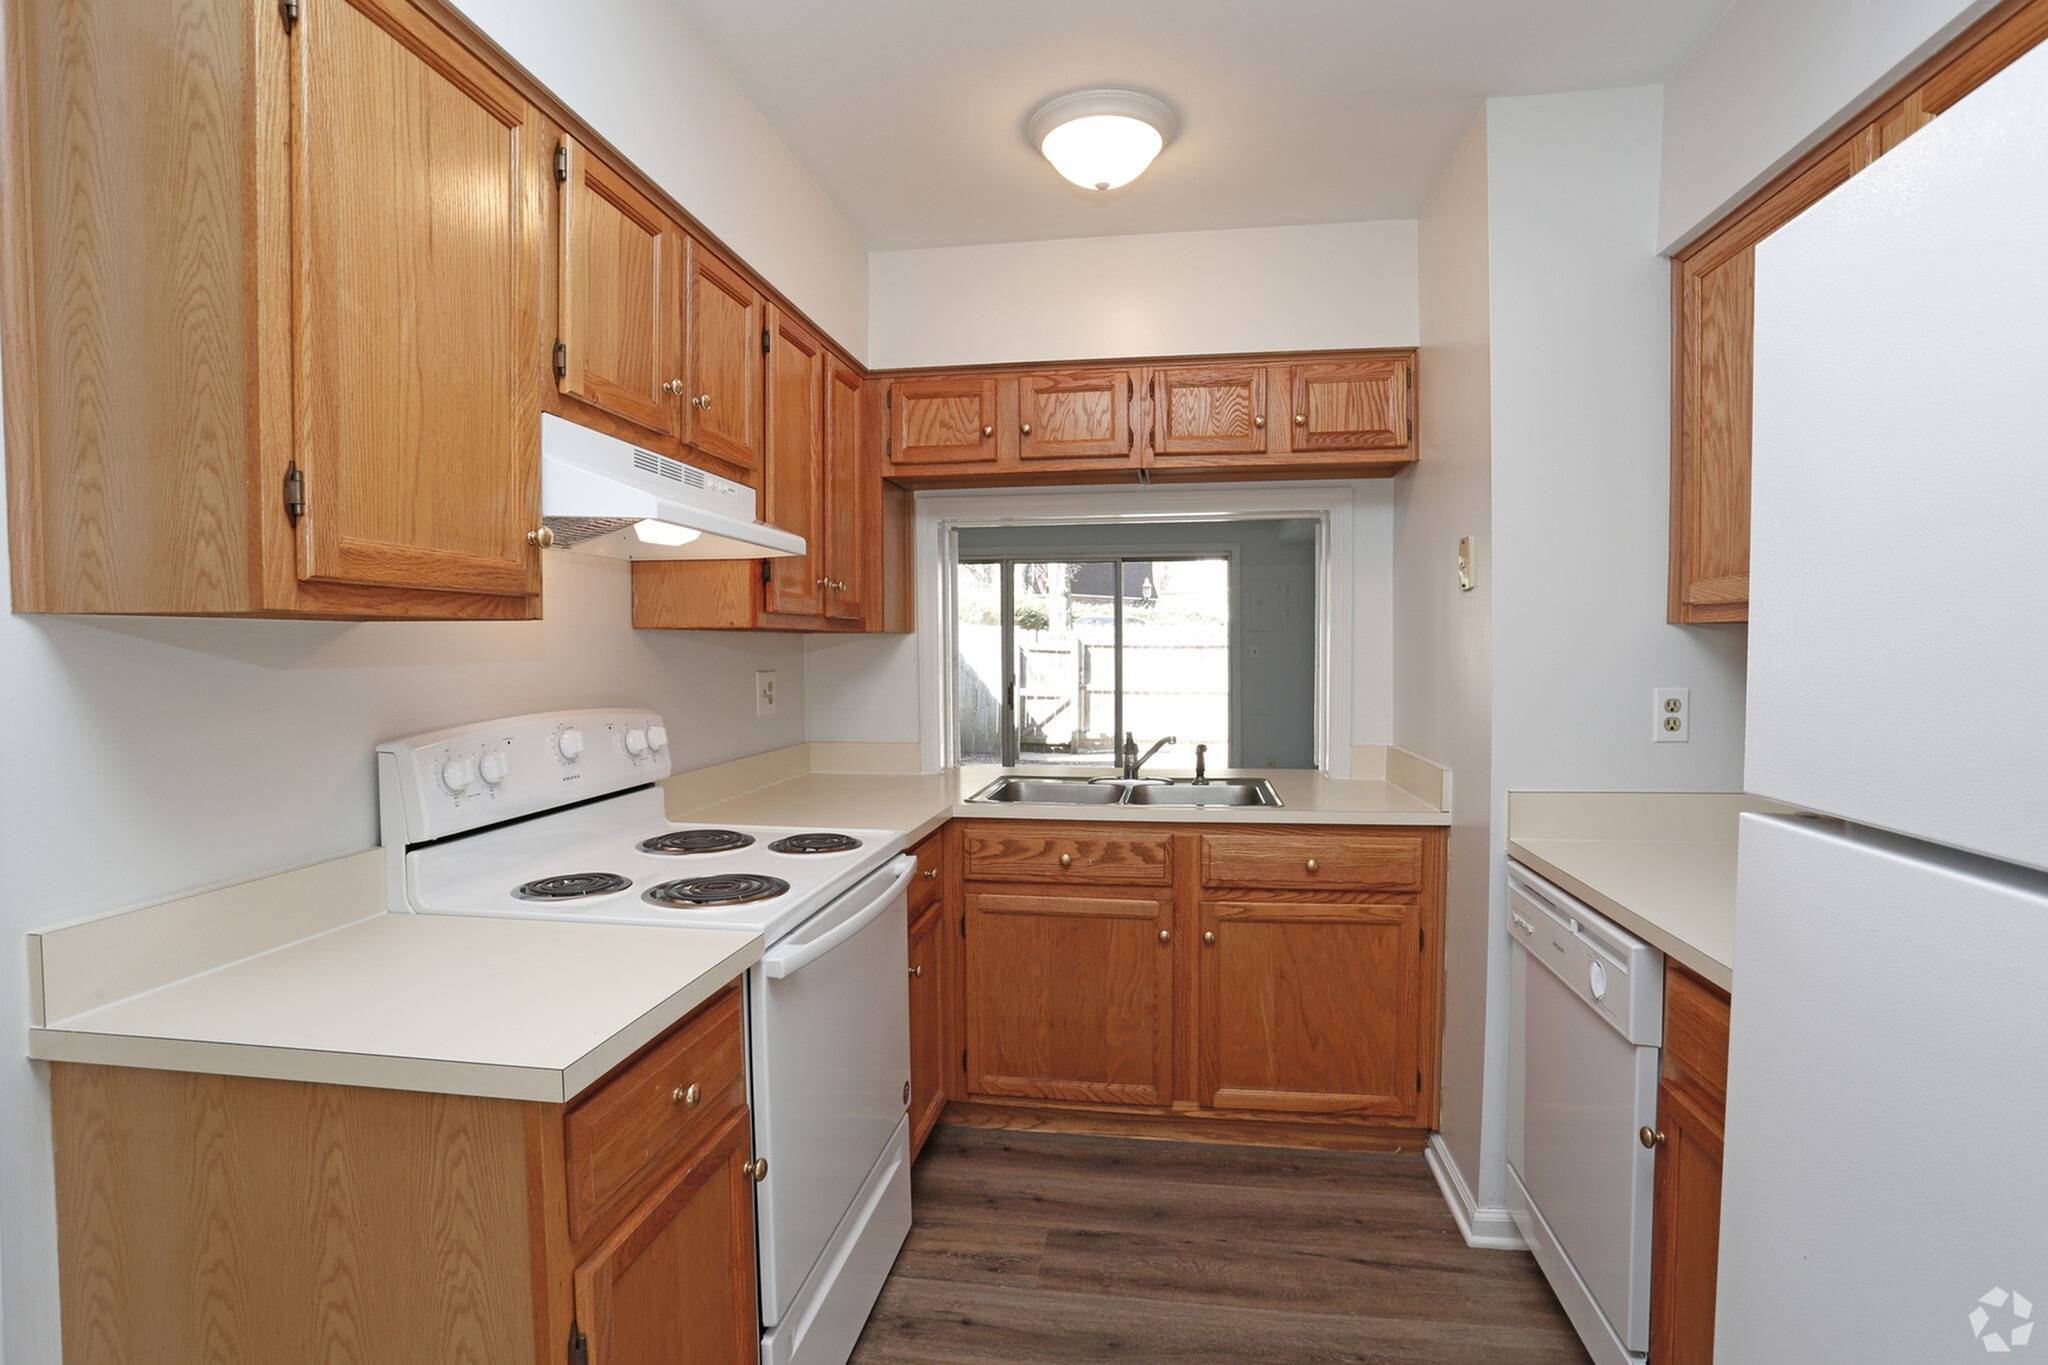 Model kitchen with wood cabinets at River Oaks, Pittsburgh, Pennsylvania